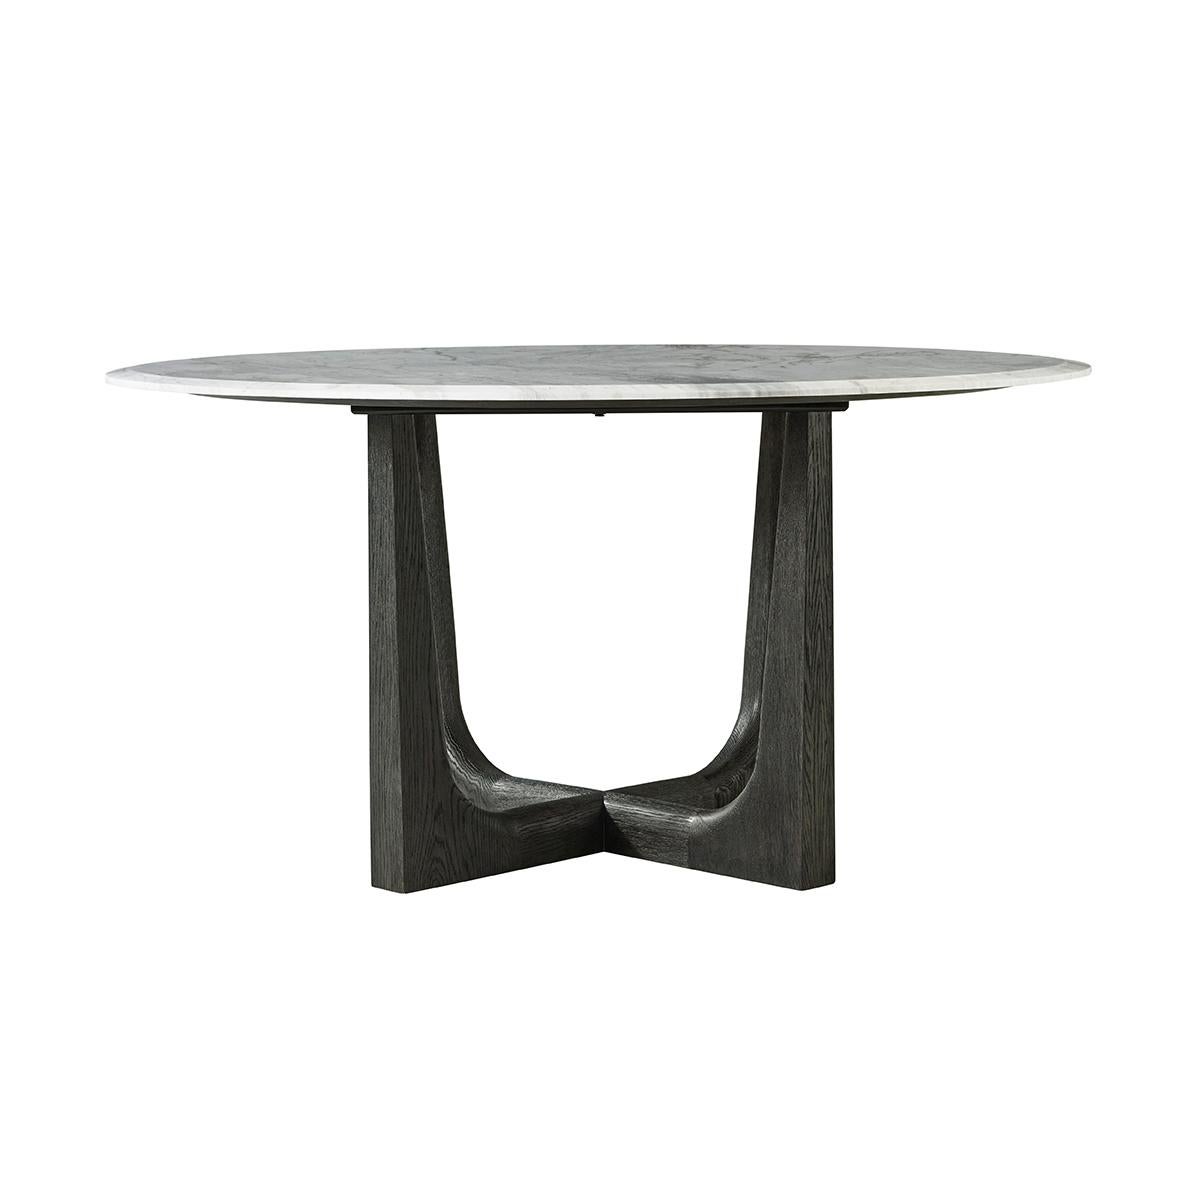 A round marble top dining table that seats six comfortably. Its X-form base and elegant legs in our dark charcoal oak finish reach upwards to perfectly balance the stone giving the impression of lightness. The beveled edge of the marble adds comfort